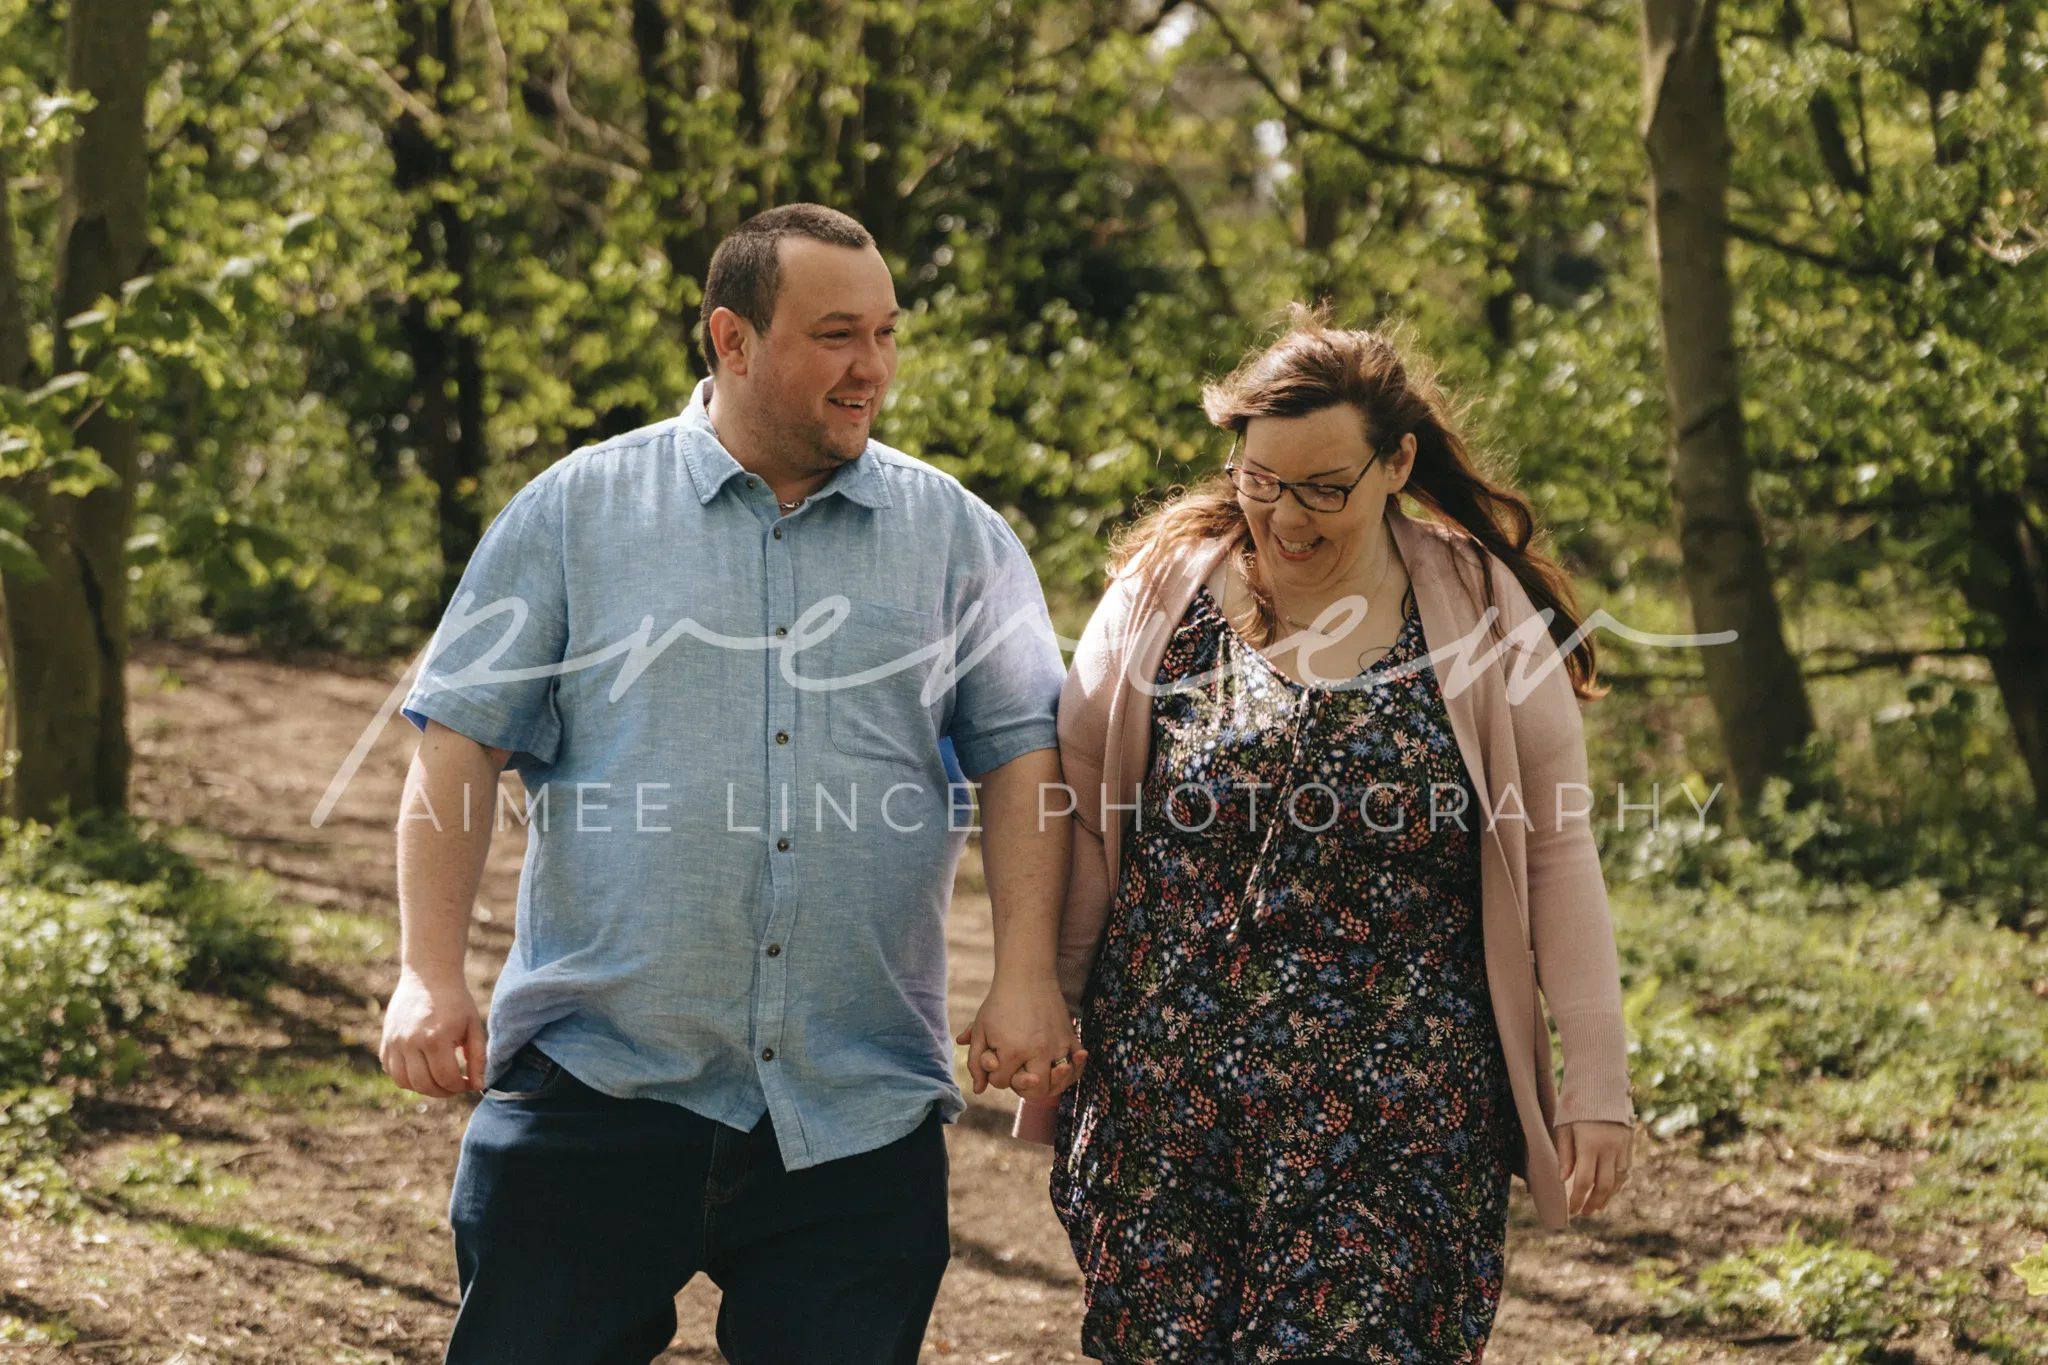 A couple holding hands and smiling while walking through a sunlit forested area, with the man on the left wearing a blue shirt and Ashley wearing a floral dress and glasses.